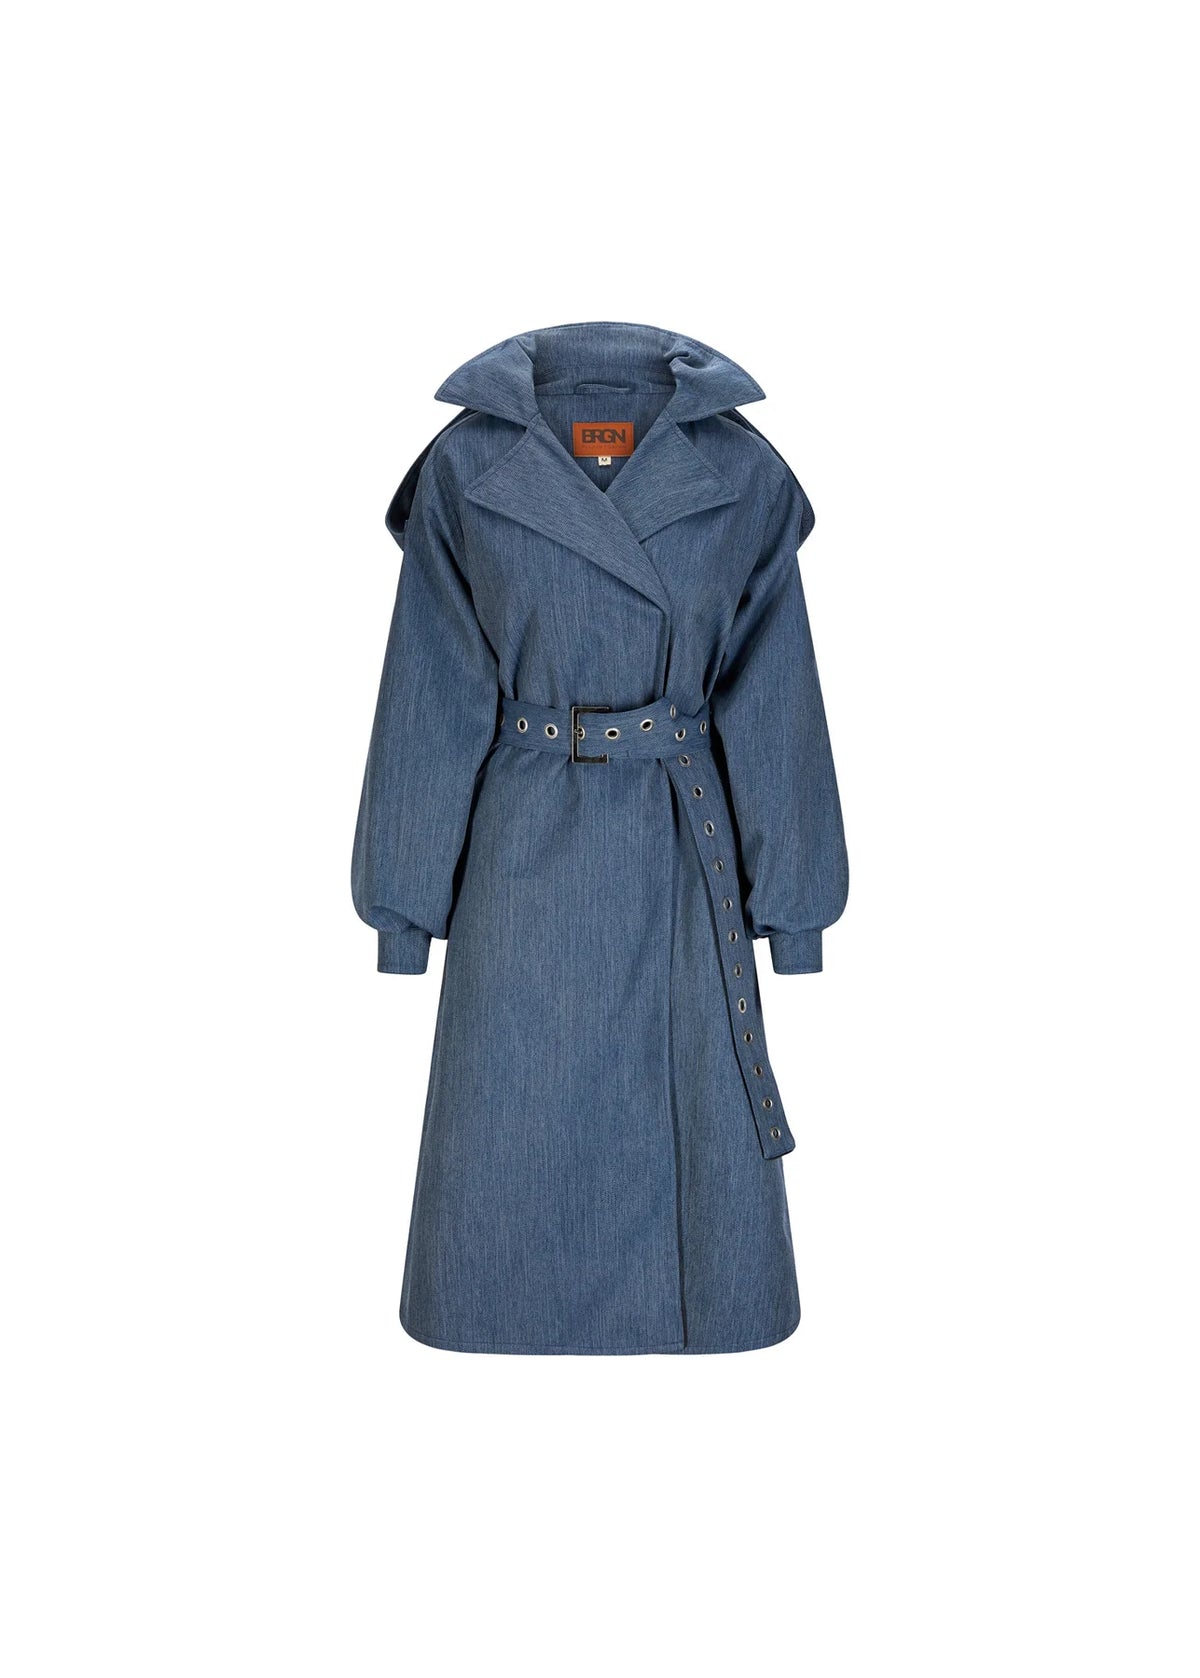 Denim blue waterproof trench coat with removable hood